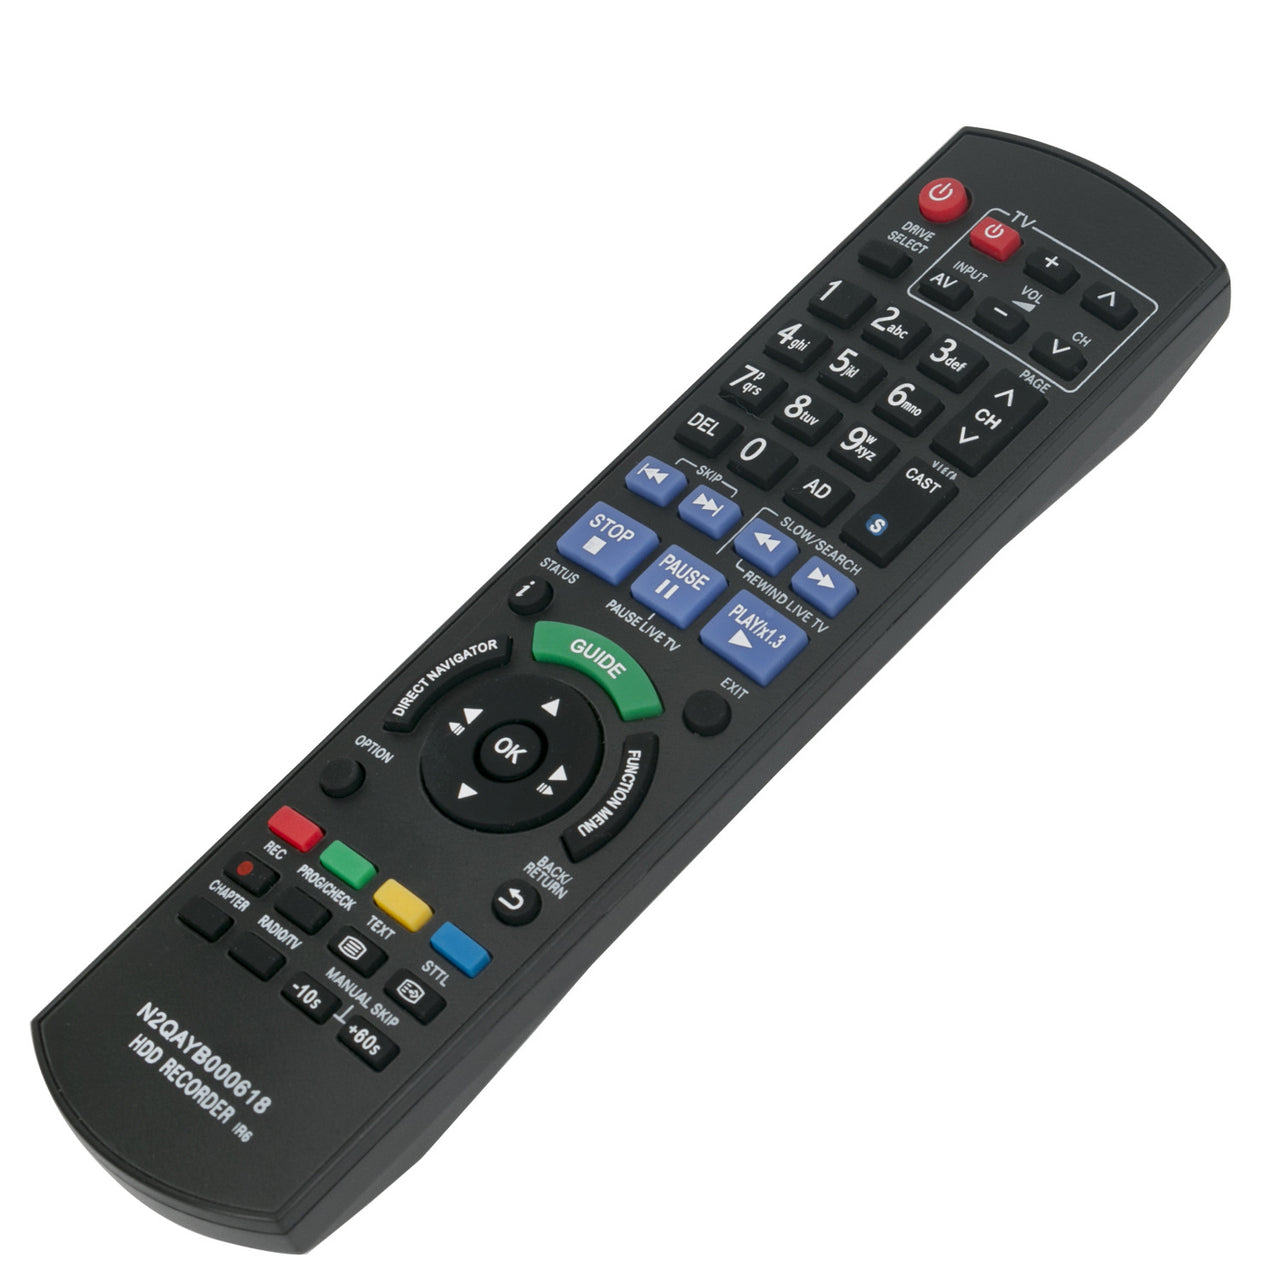 N2QAYB000618 Replacement Remote for Panasonic DVD Recorder